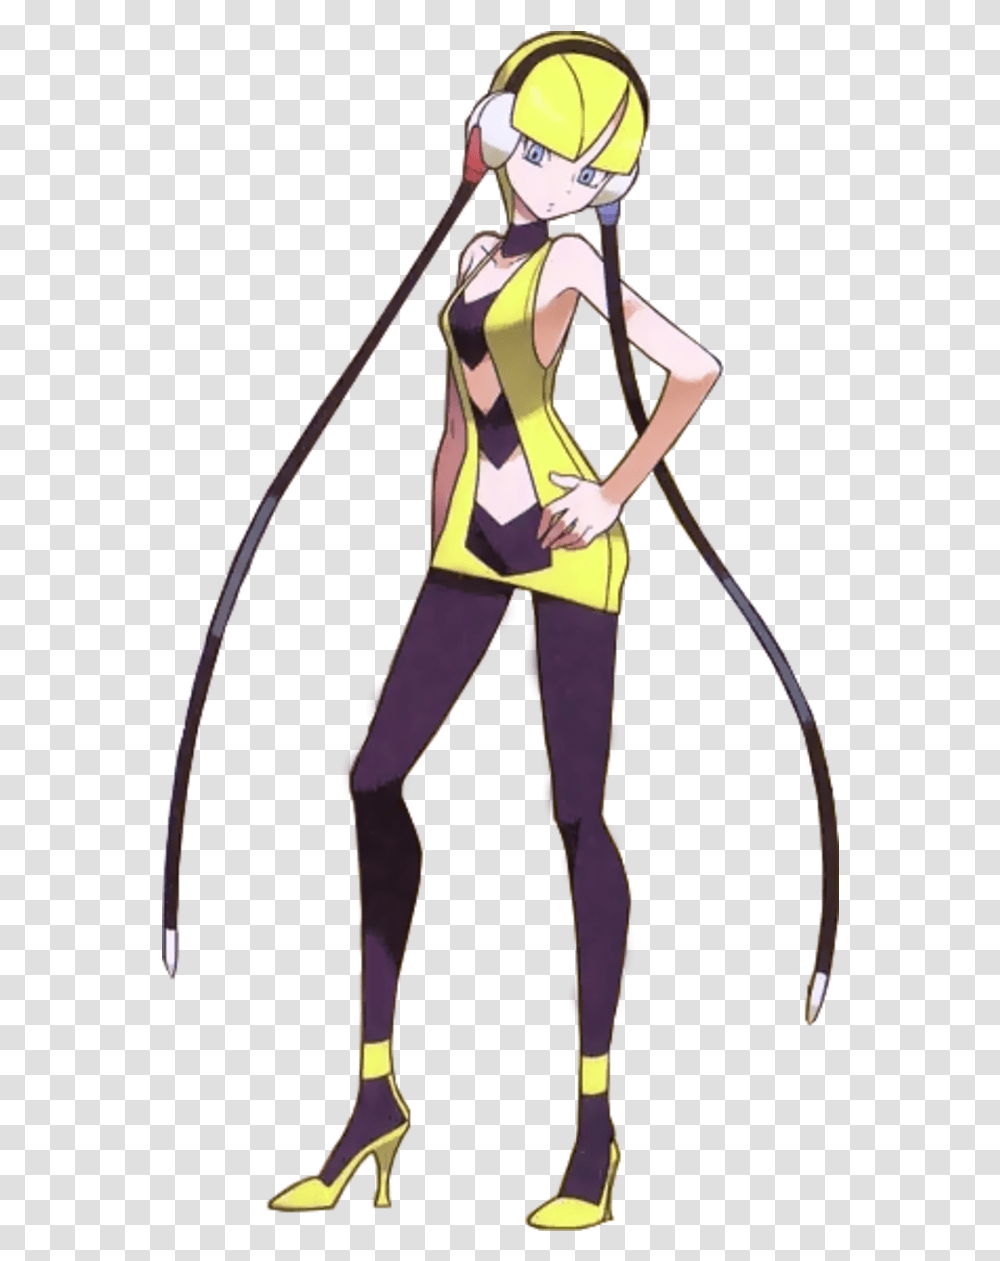 Pokmon Black And White Version Gym Leaders Weakness Pokemon Girl Gym Leaders, Whip, Person, Human, Helmet Transparent Png